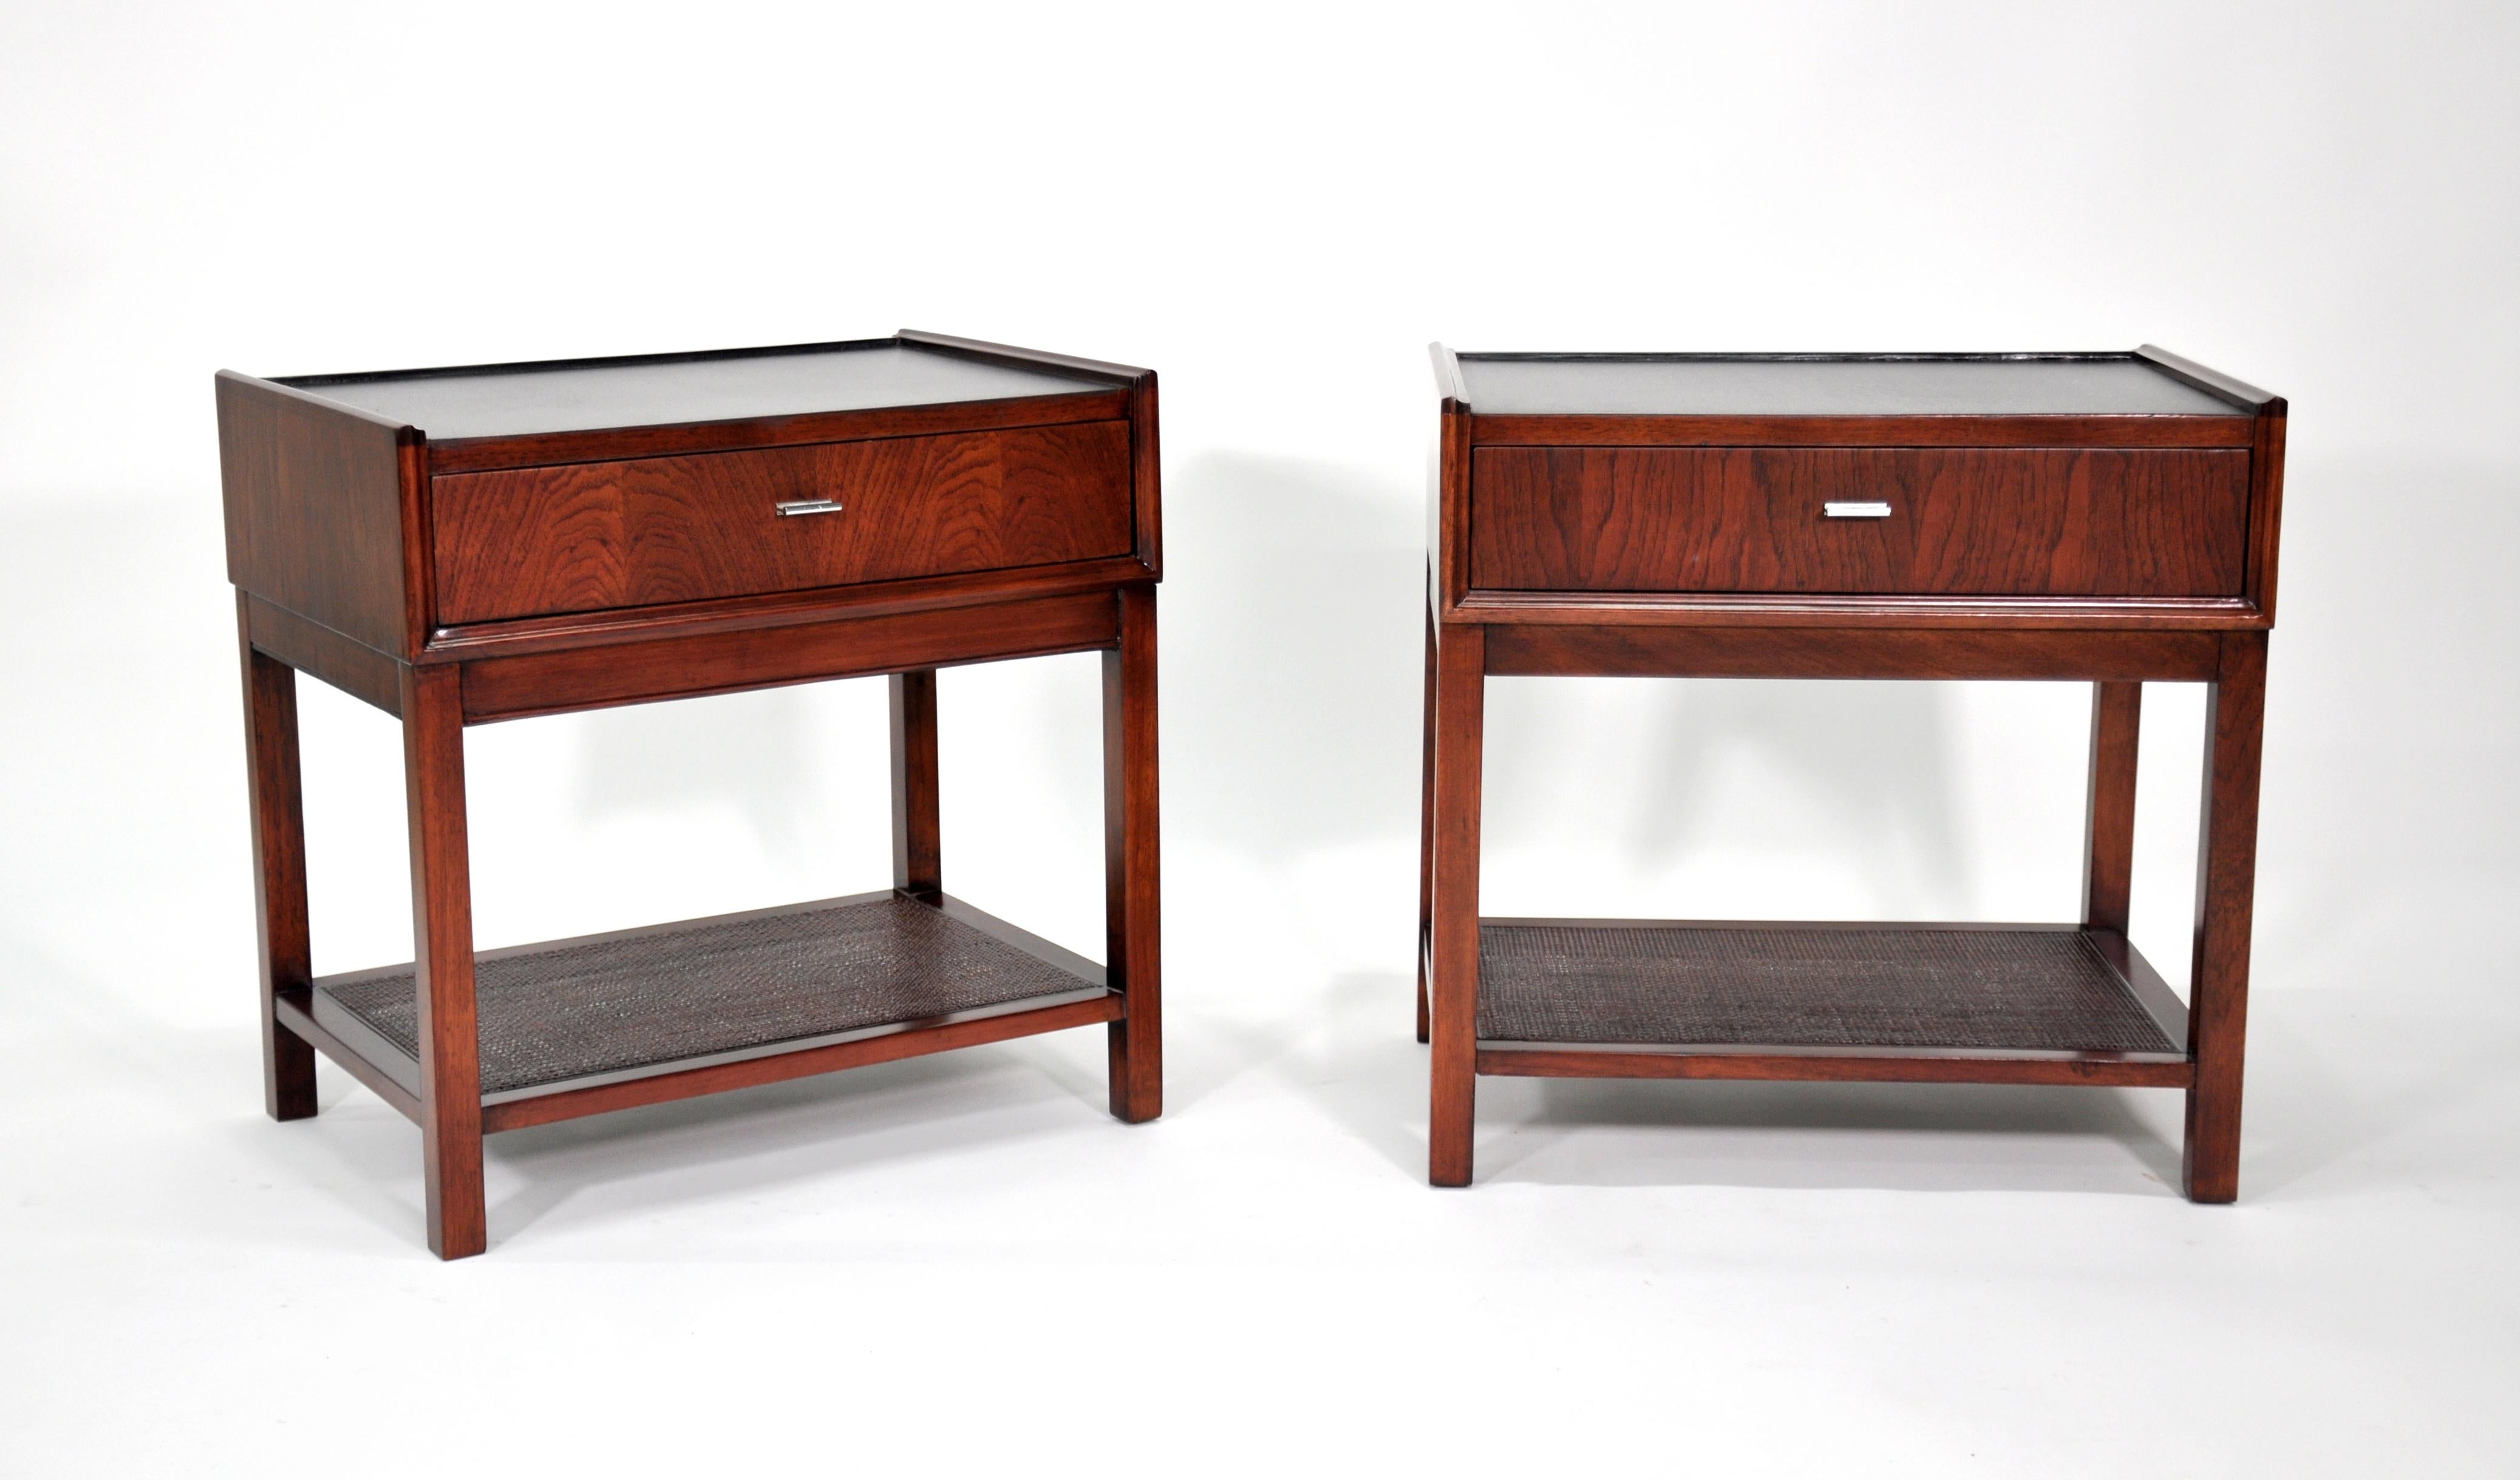 American Pair of Rosewood, Cane and Black Leather Nightstands or Side Tables by Founders